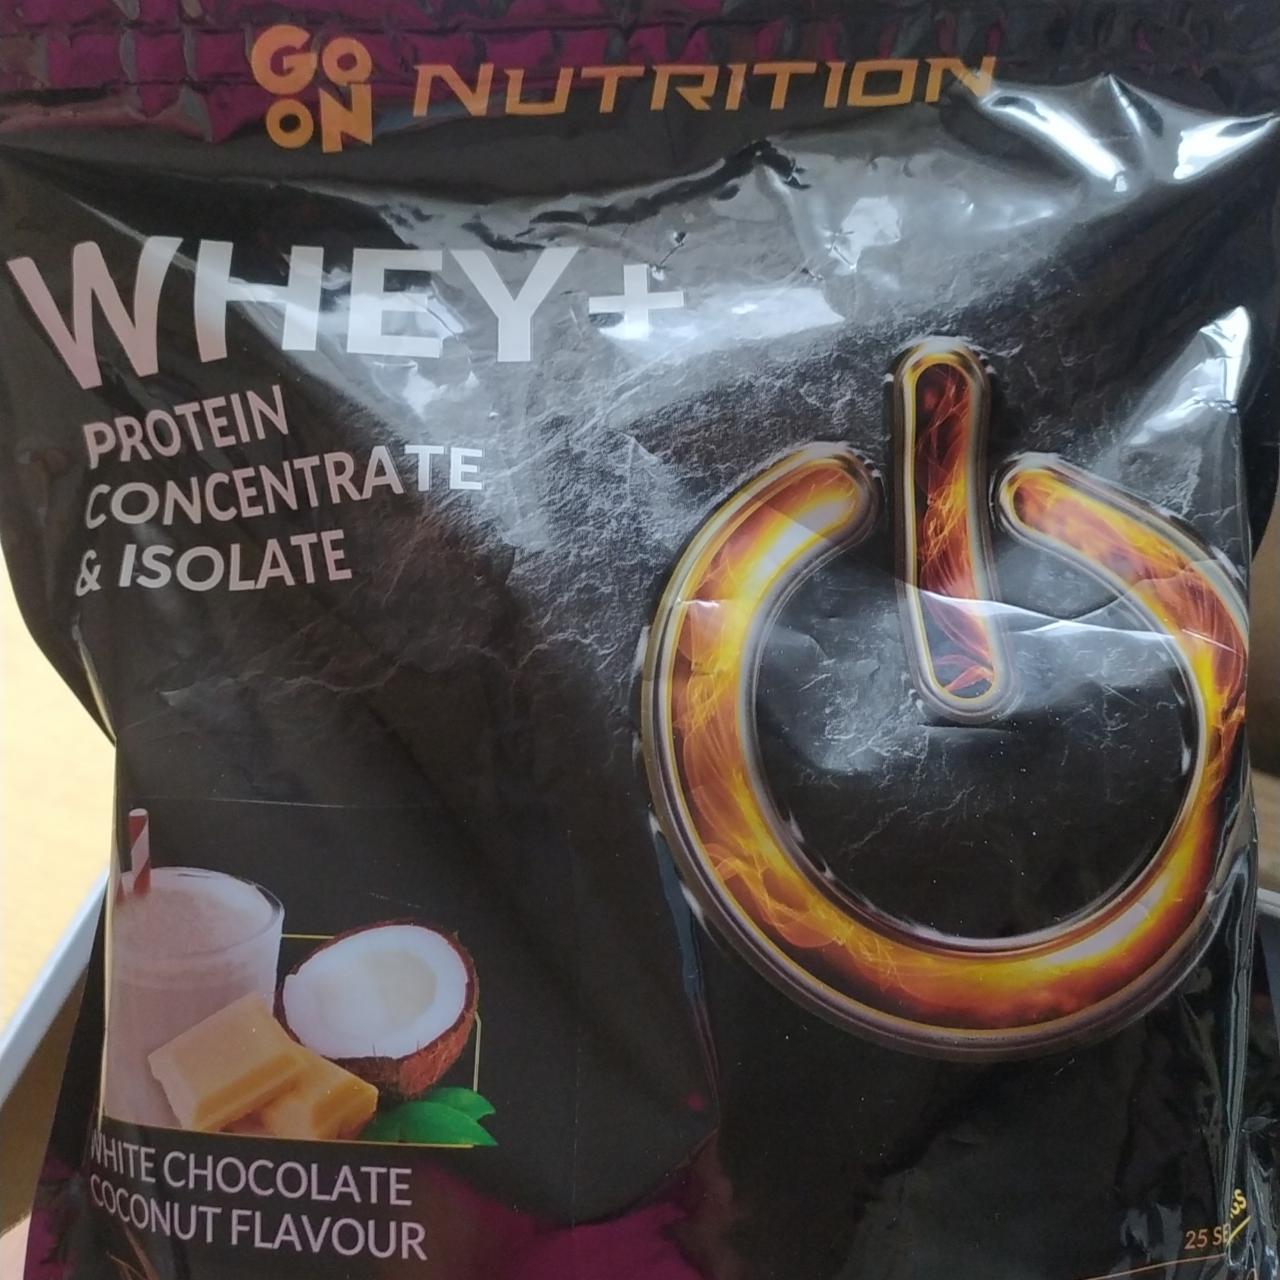 Fotografie - Whey + protein concentrate & isolate white chocolate coconut flavour